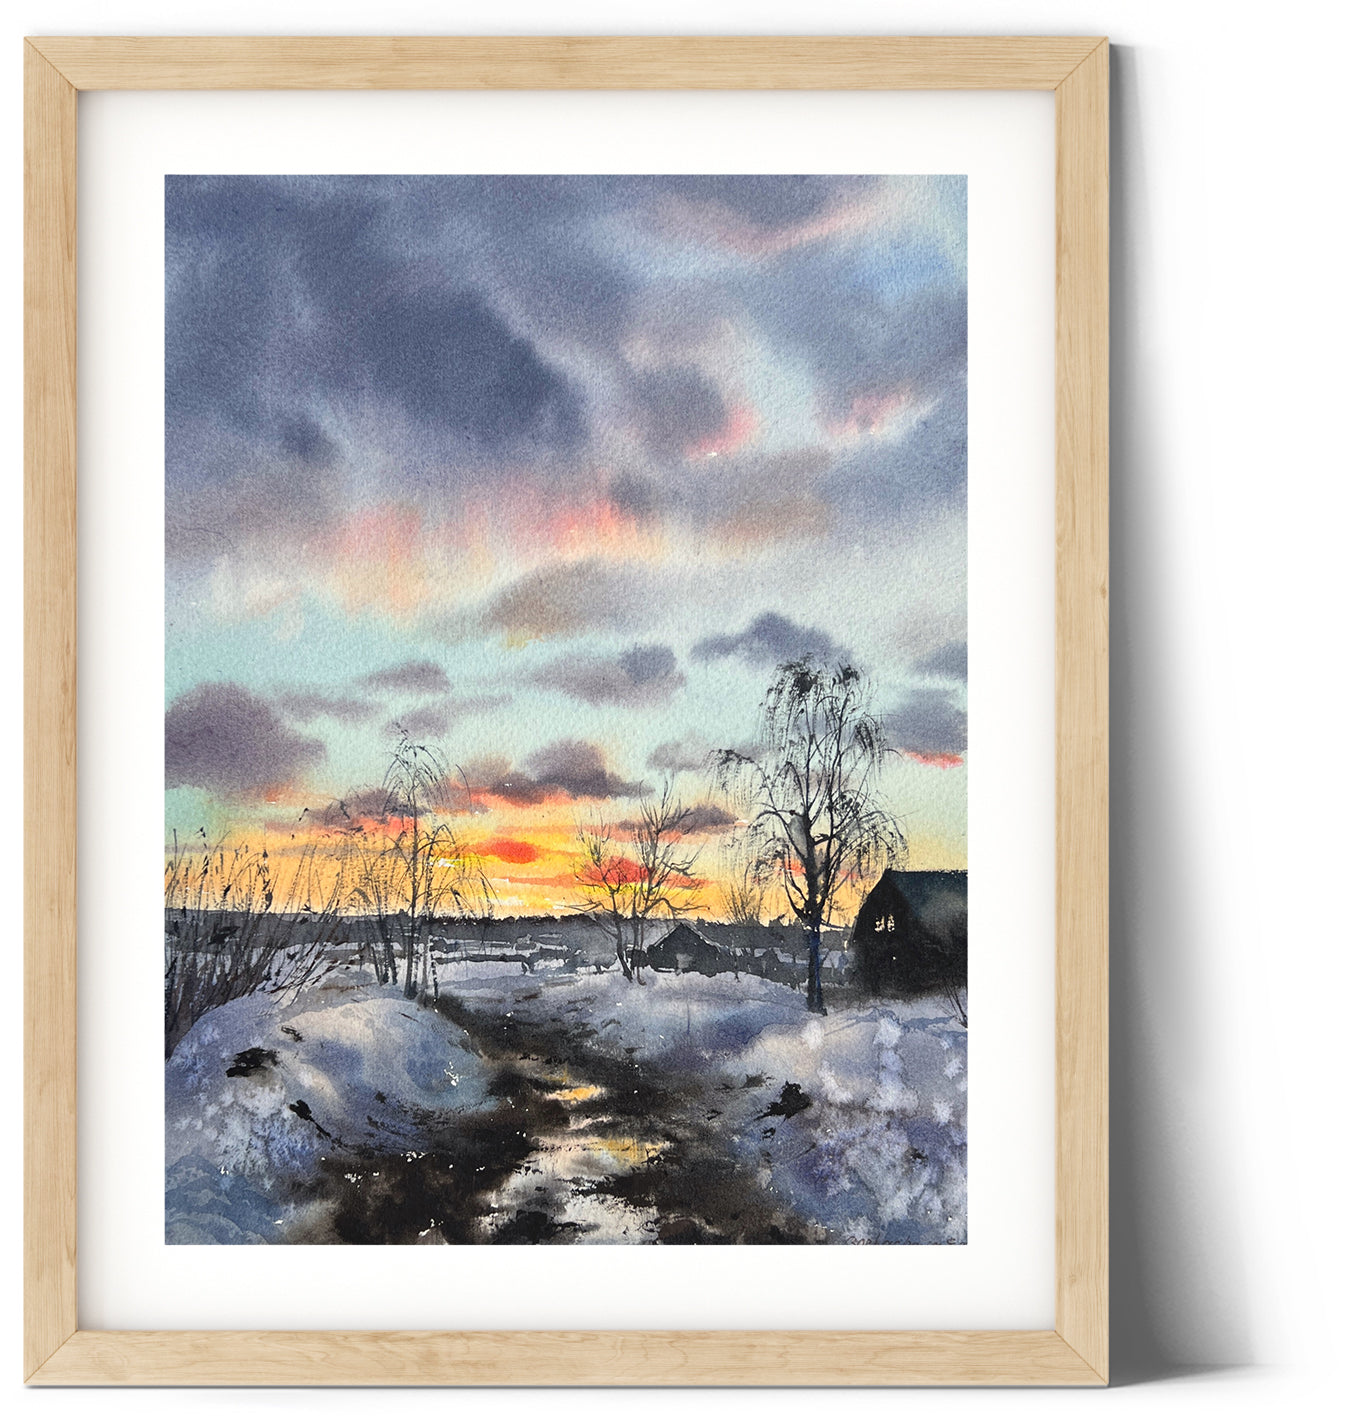 Snowy Forest Painting Original, Watercolor Landscape, Snowy Trees Wall Decor, Winter Art, Sunny Evening